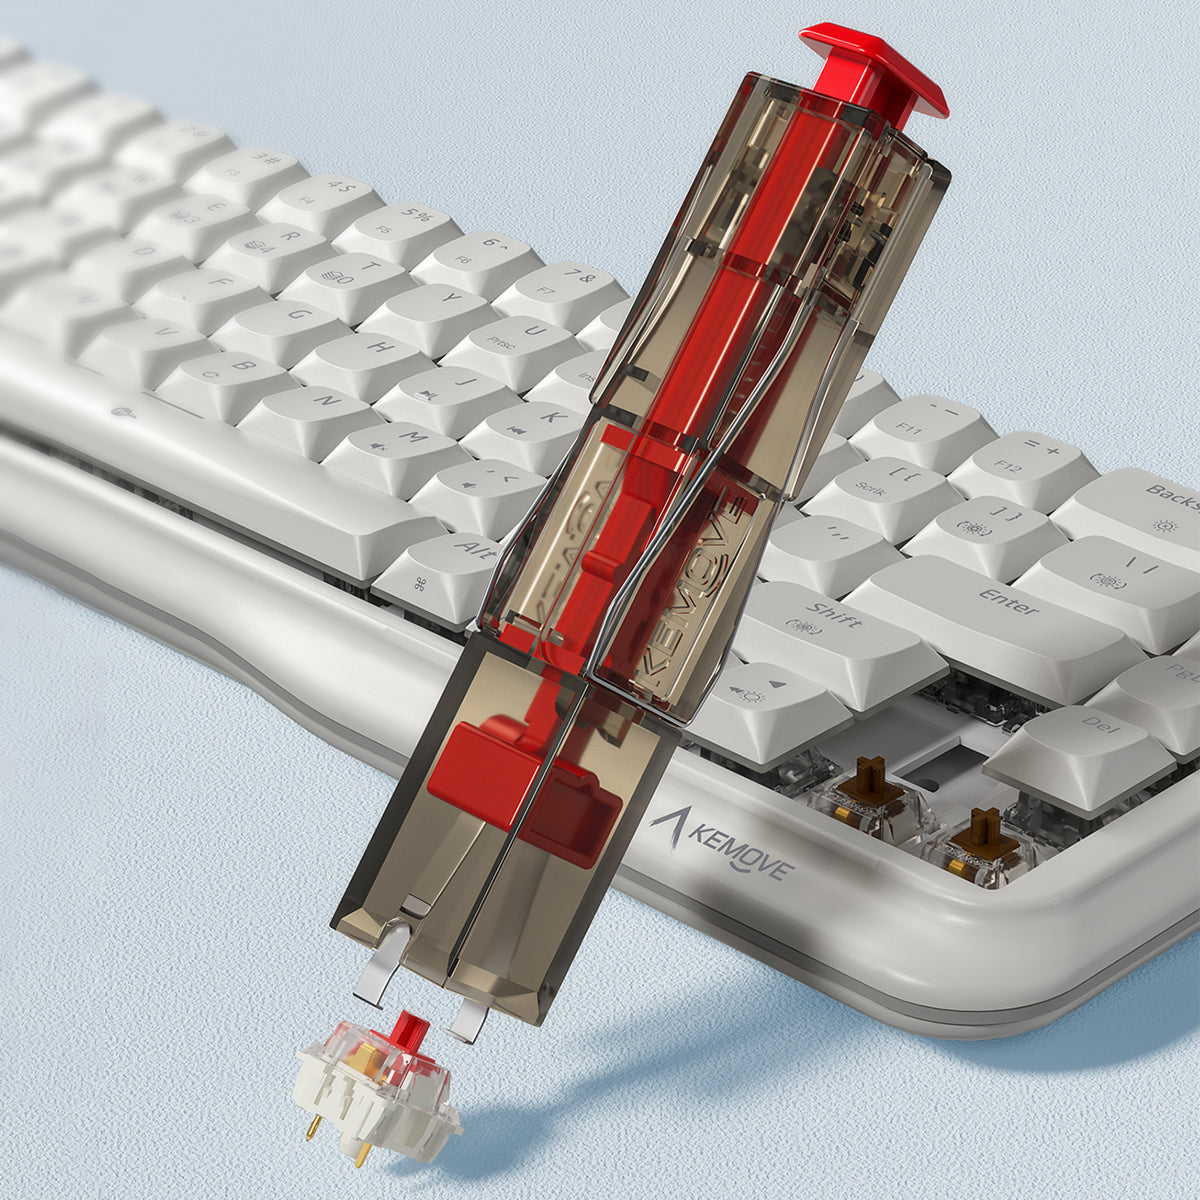 Kemove 2 in 1 Keycap and Switch Puller